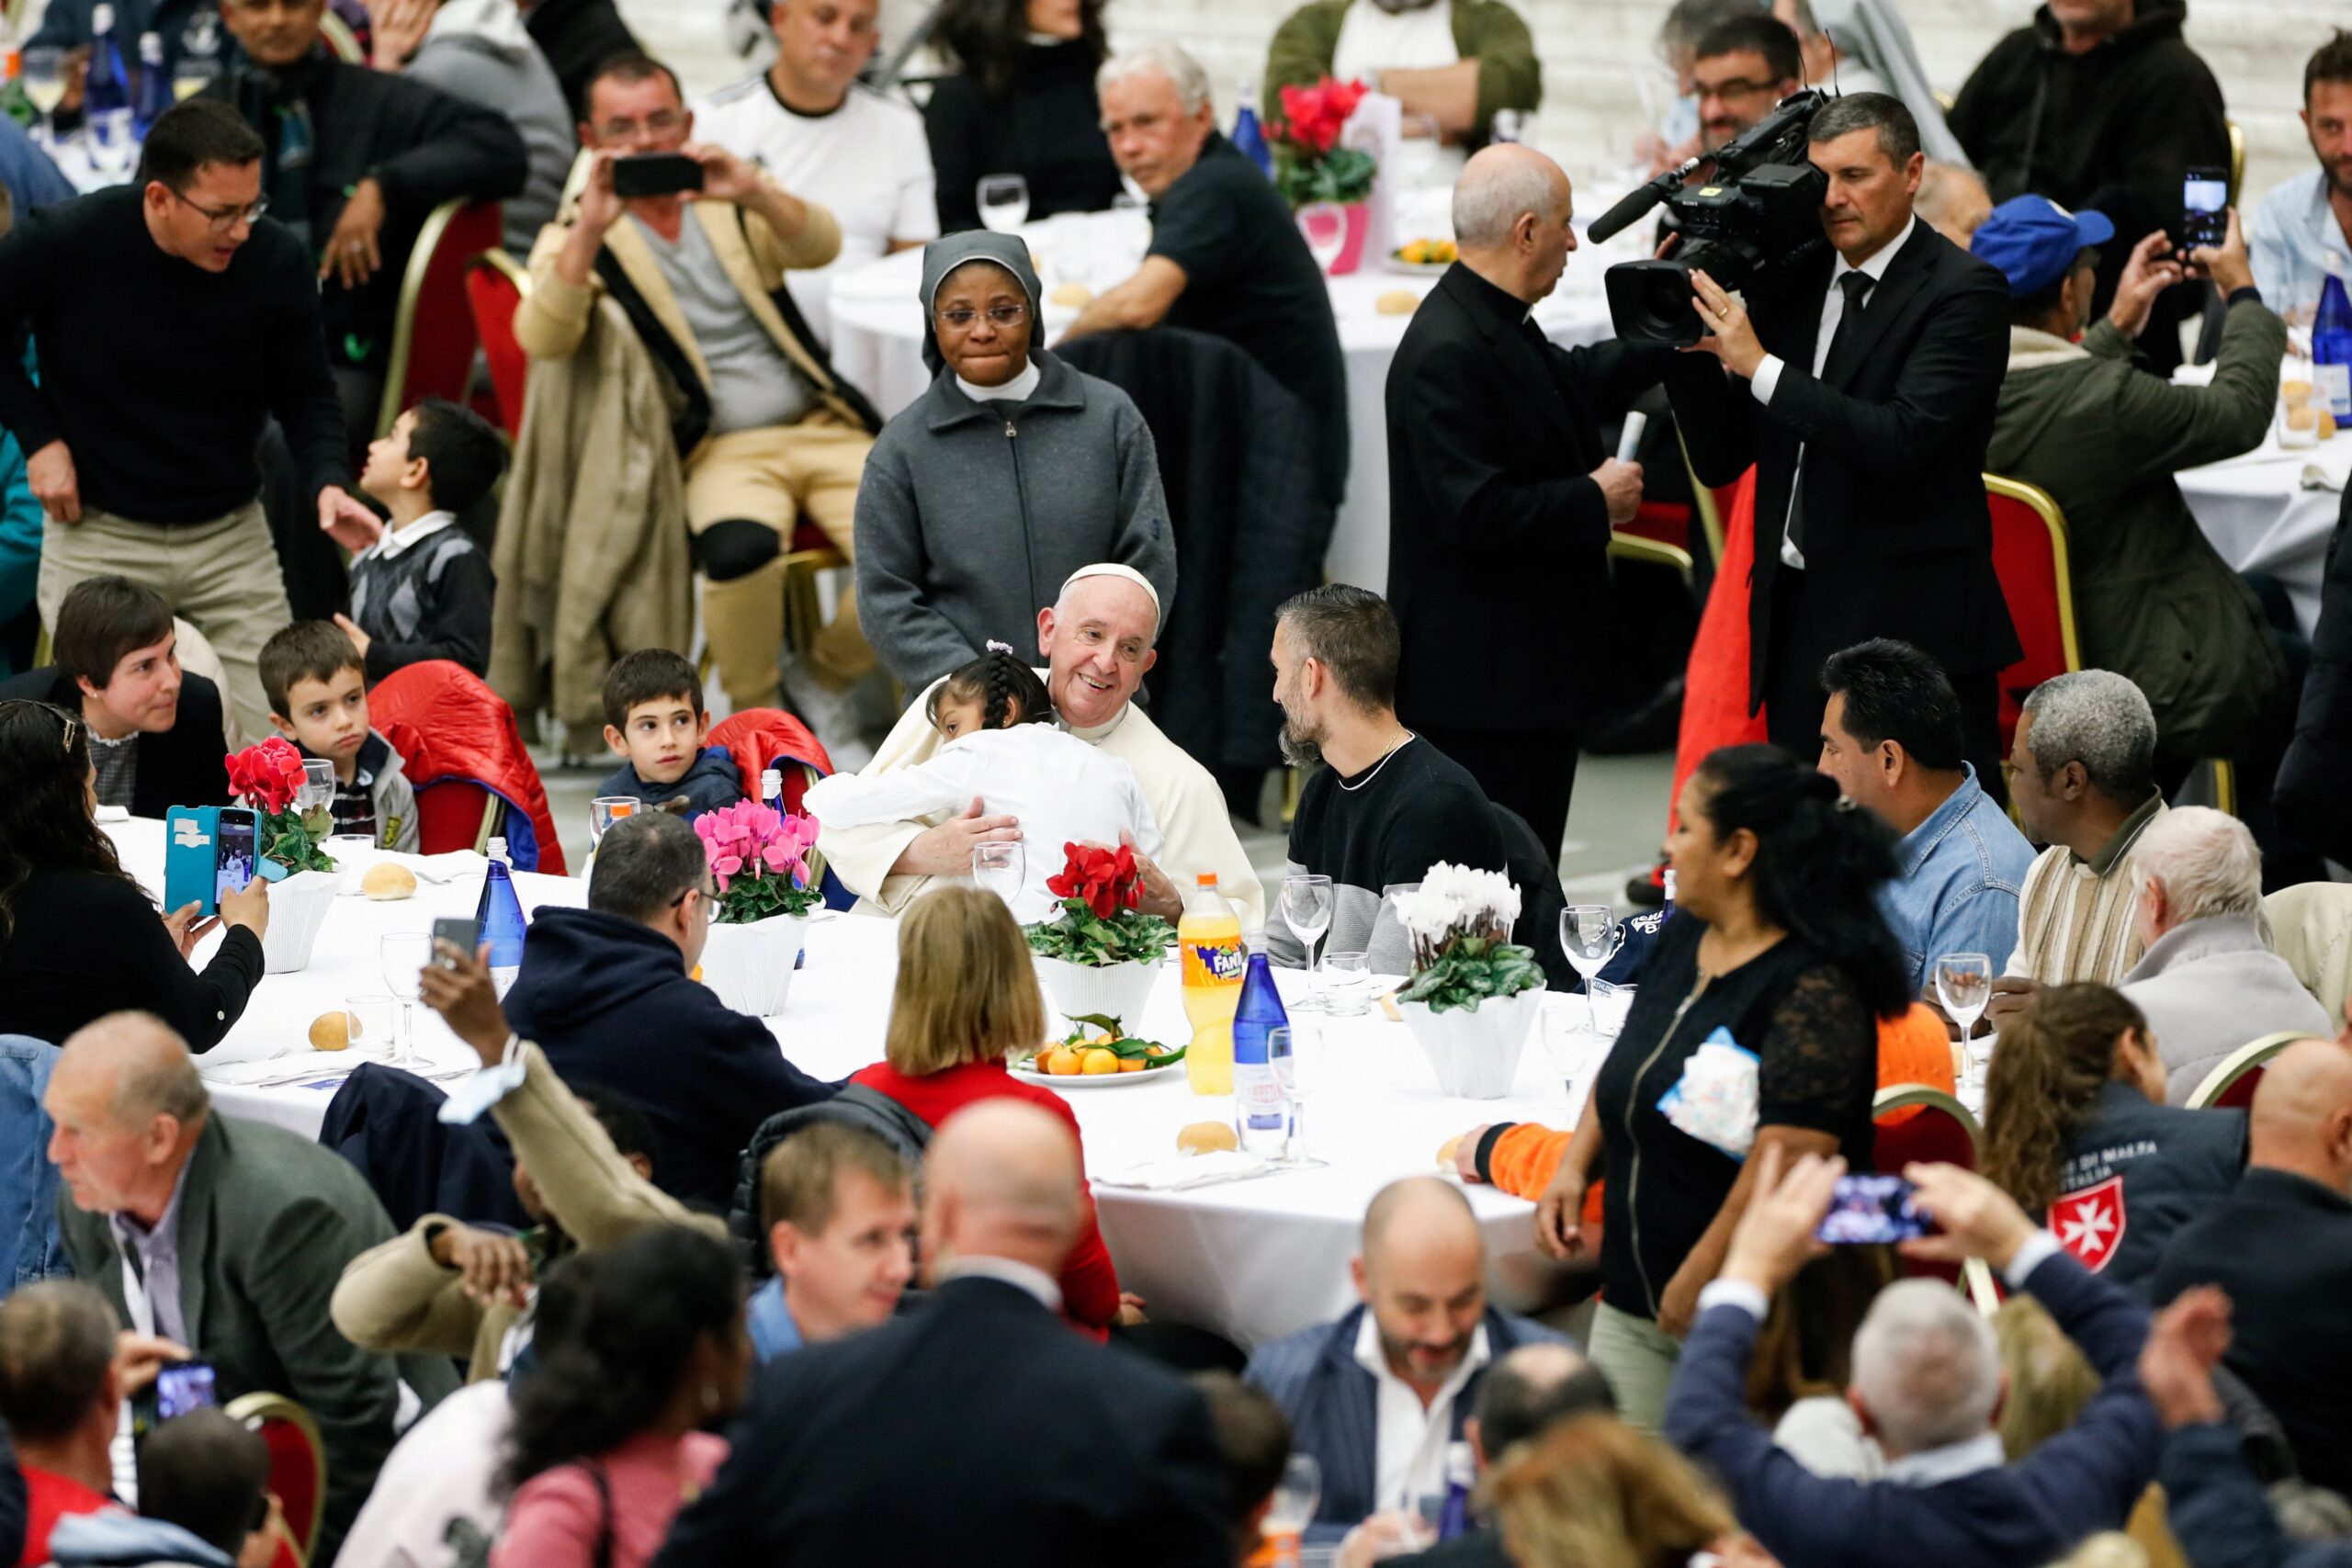 Pope Francis joins some 1,300 guests for lunch in the Vatican audience hall on the World Day of the Poor Nov. 13, 2022. (CNS photo/Remo Casilli, Reuters)